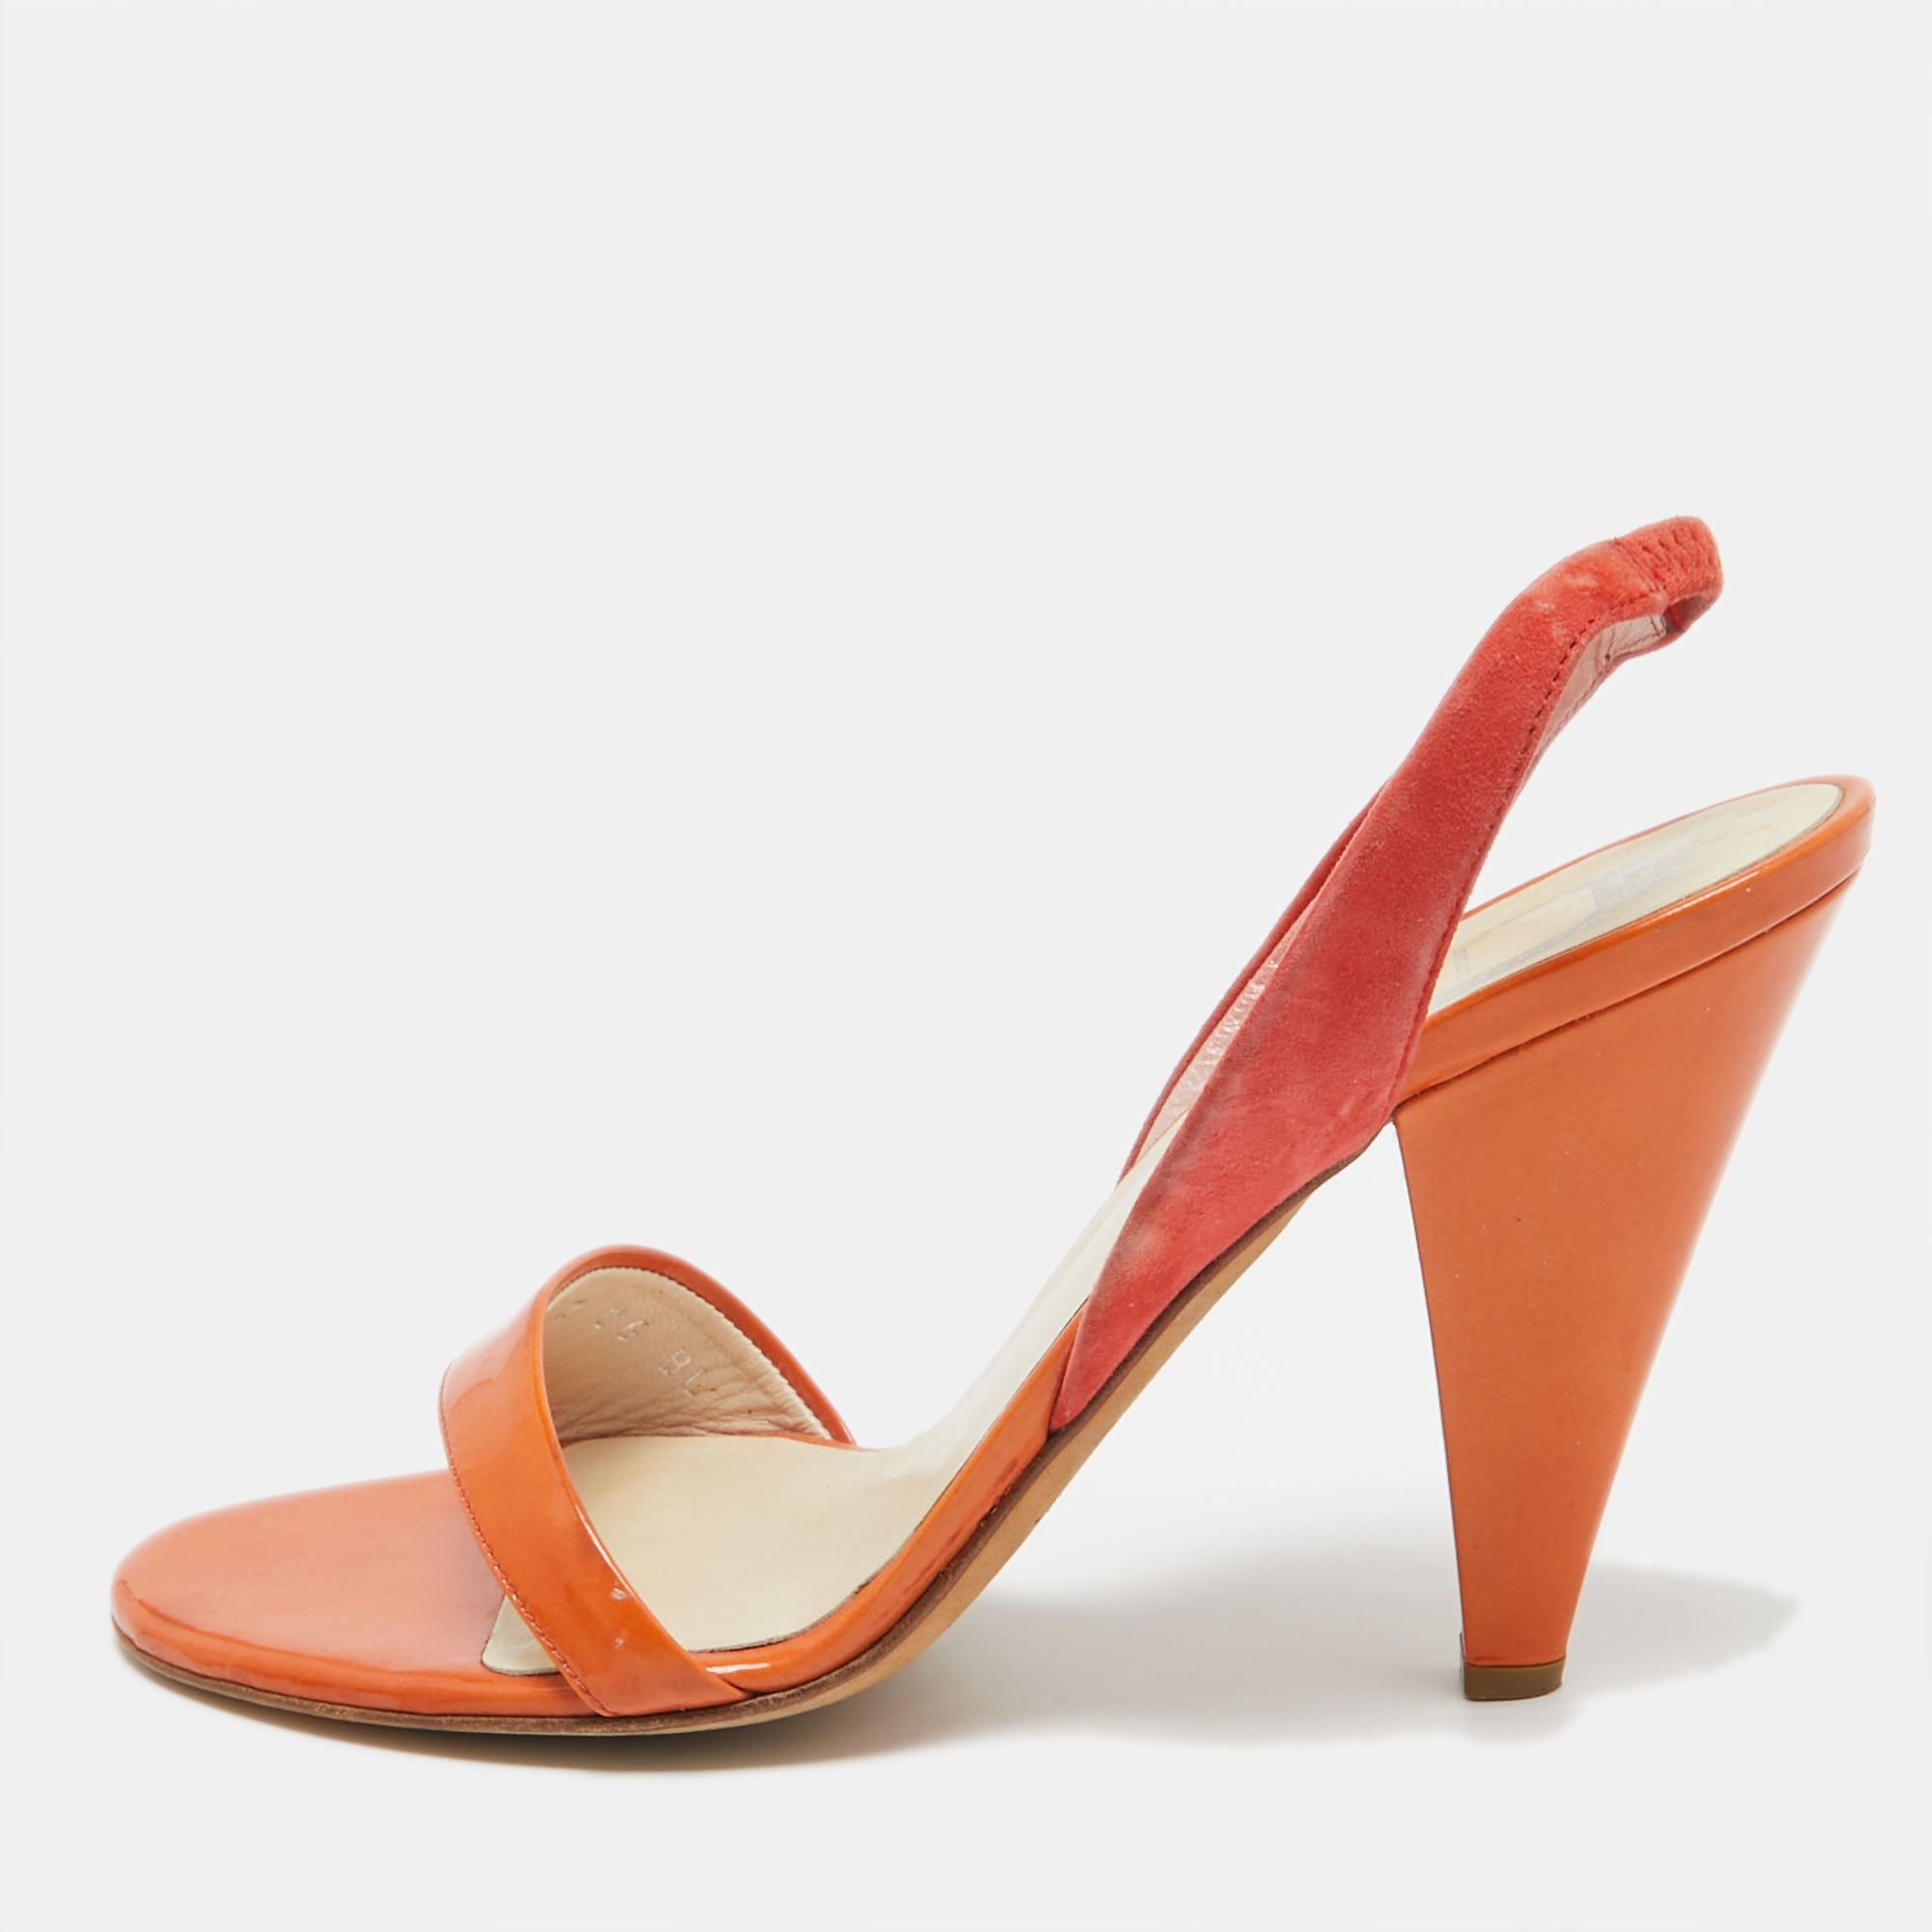 Pre-owned Dior Orange Suede And Patent Slingback Sandals Size 37